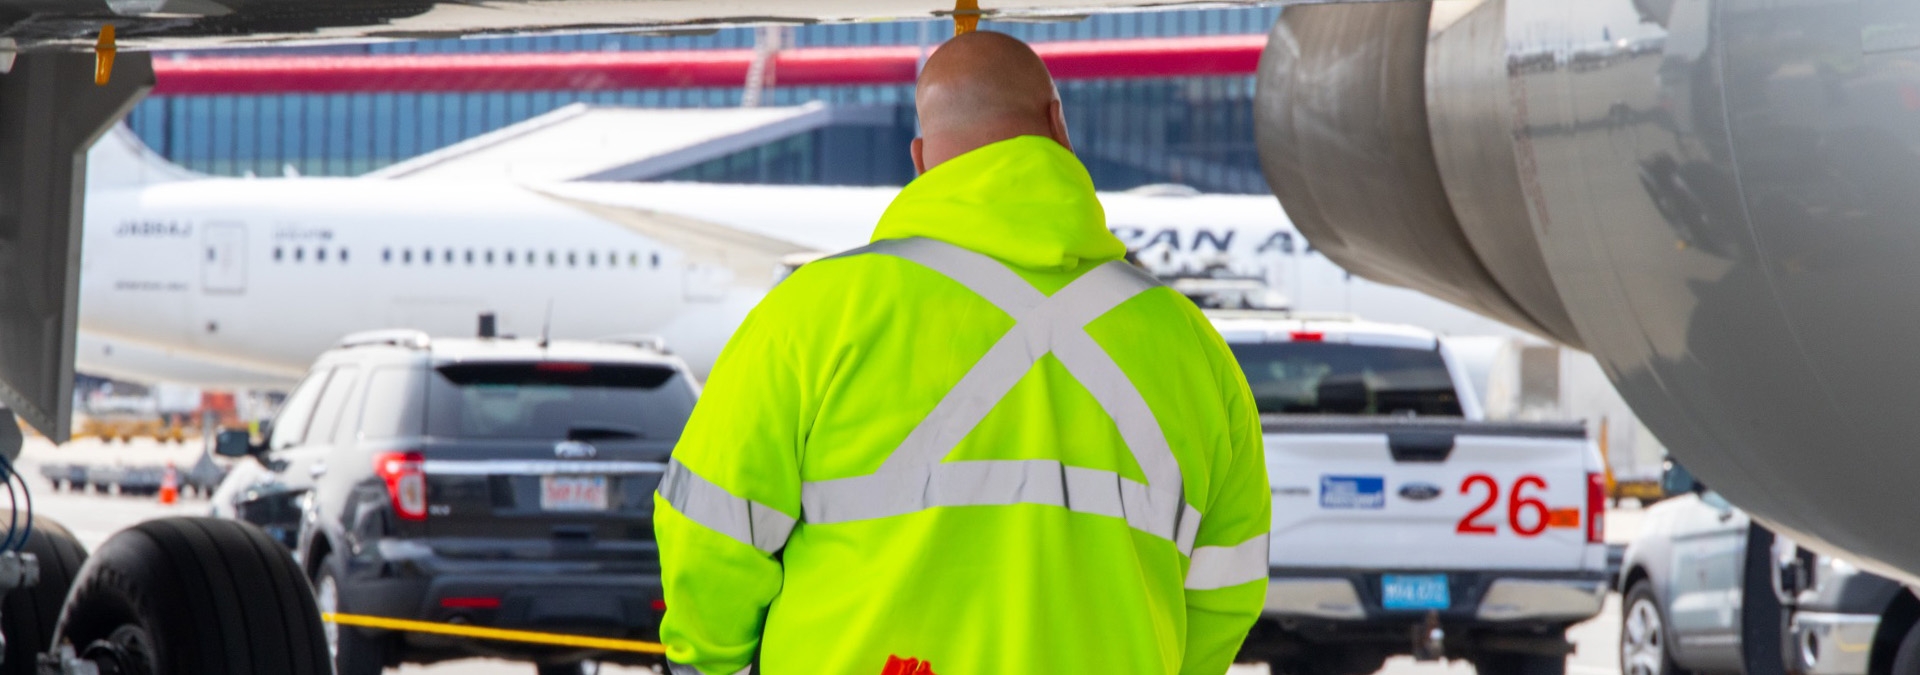 Man with a hi-visibility jacket working on tarmac